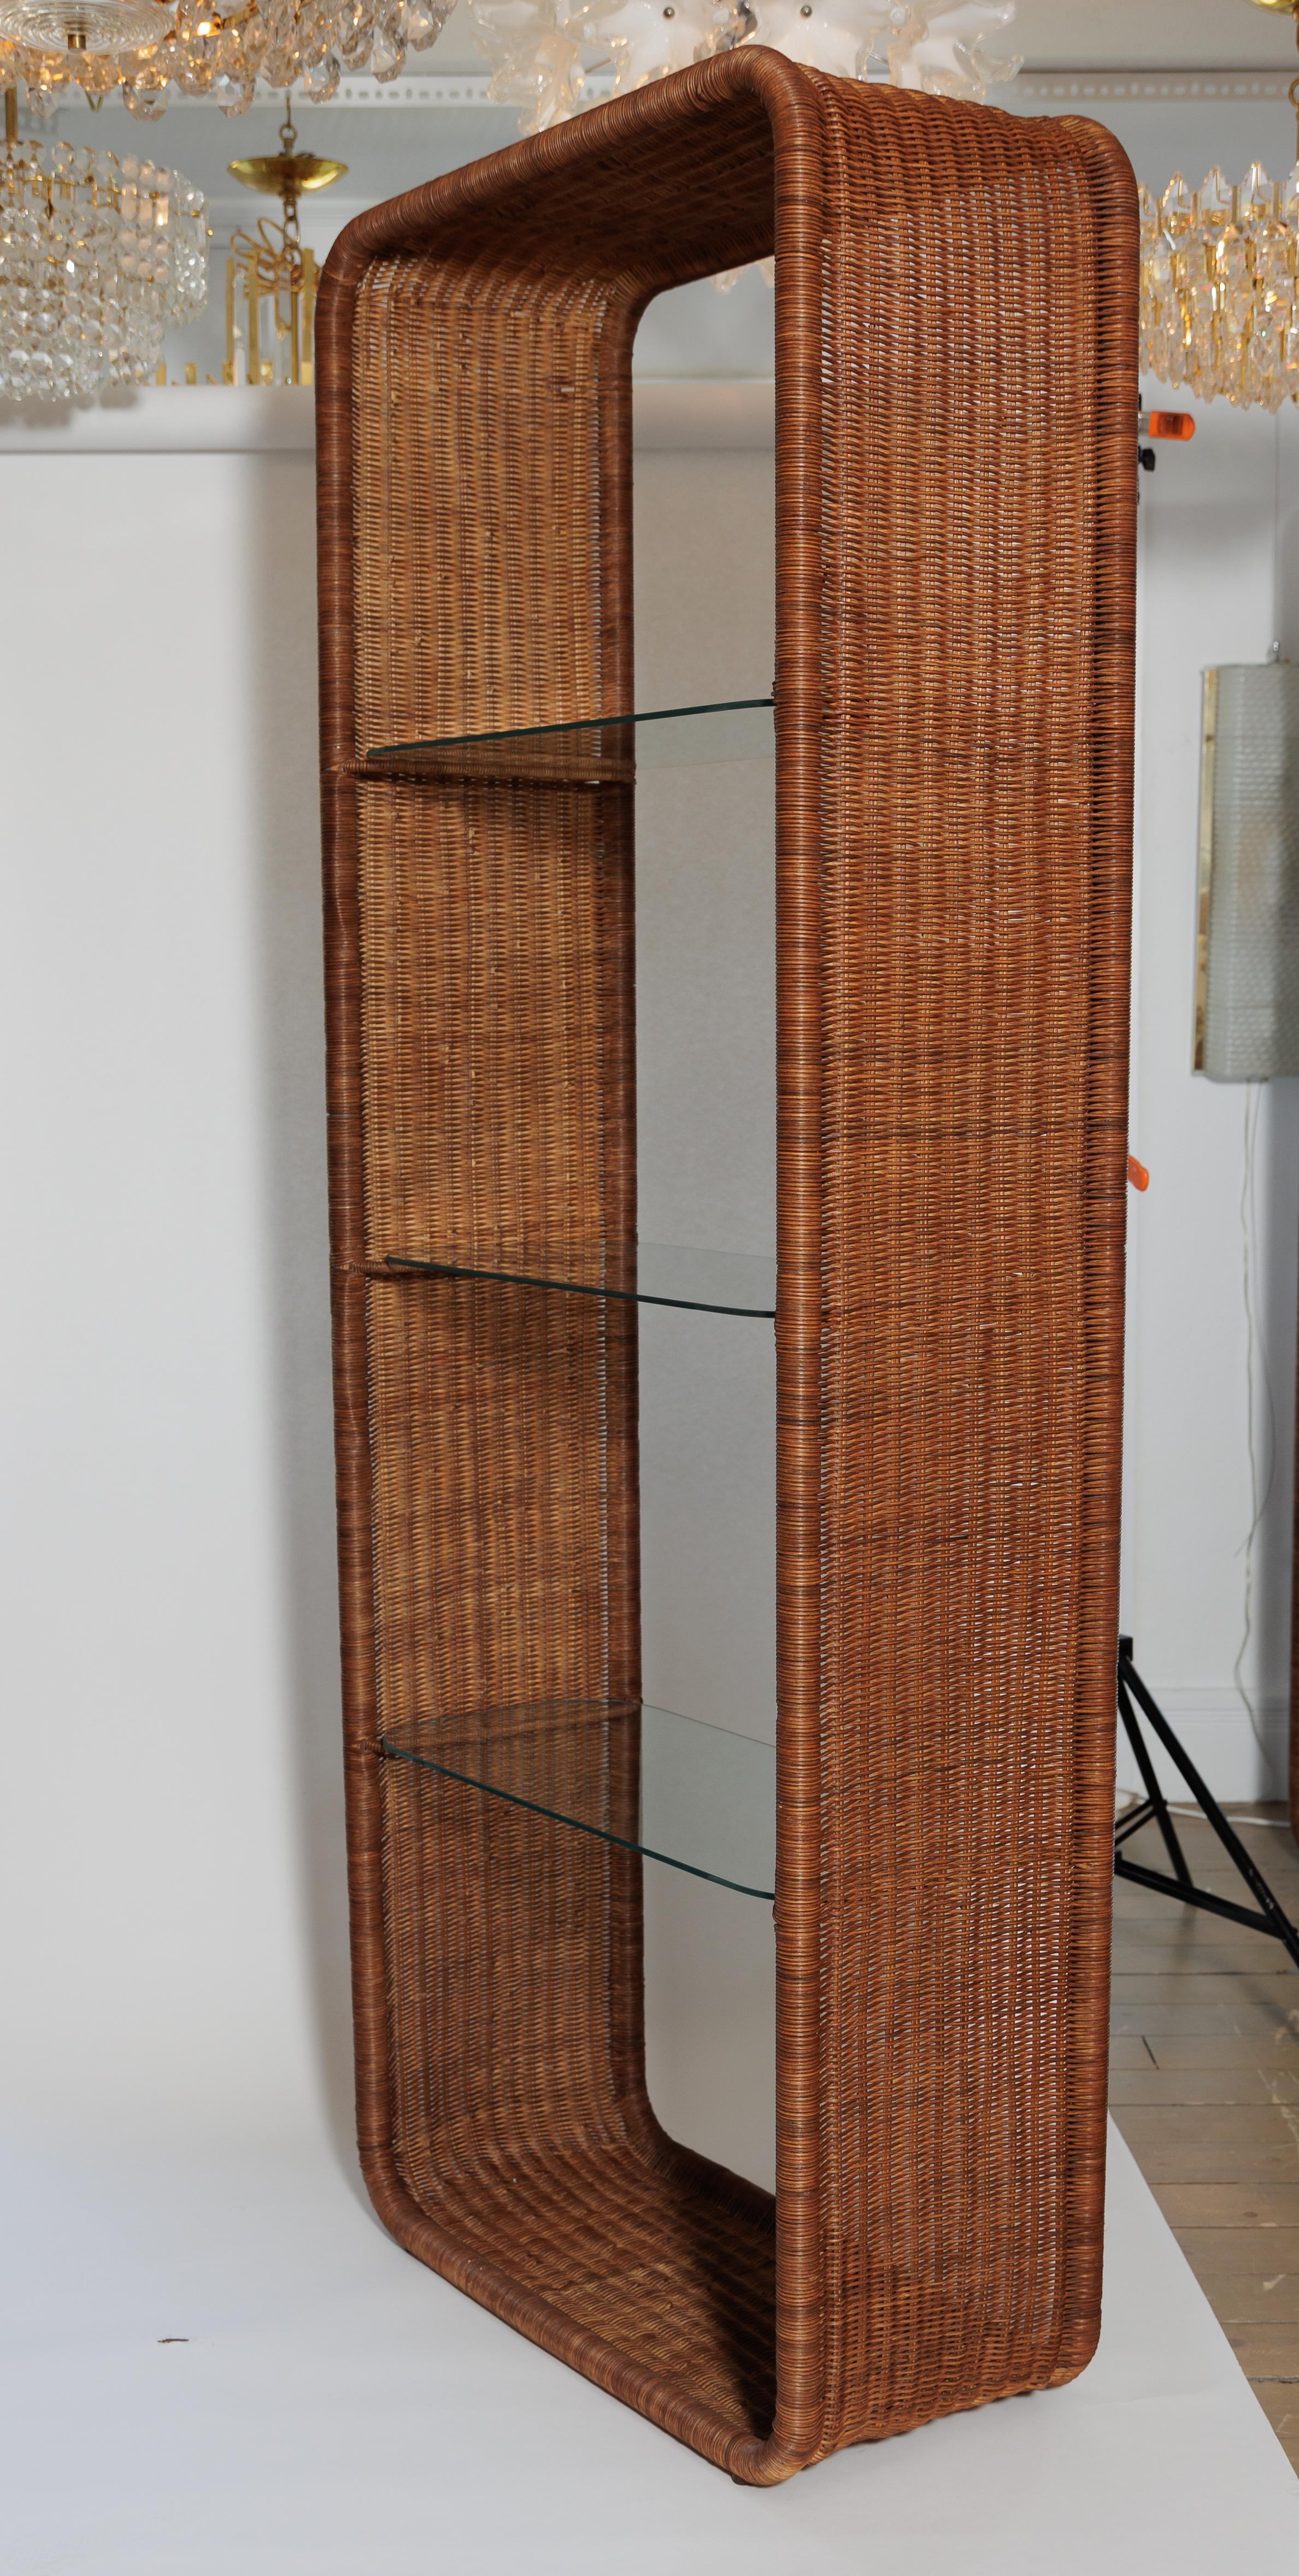 Woven Pair of Stained Wicker Shelf Units with Three Glass Shelves For Sale